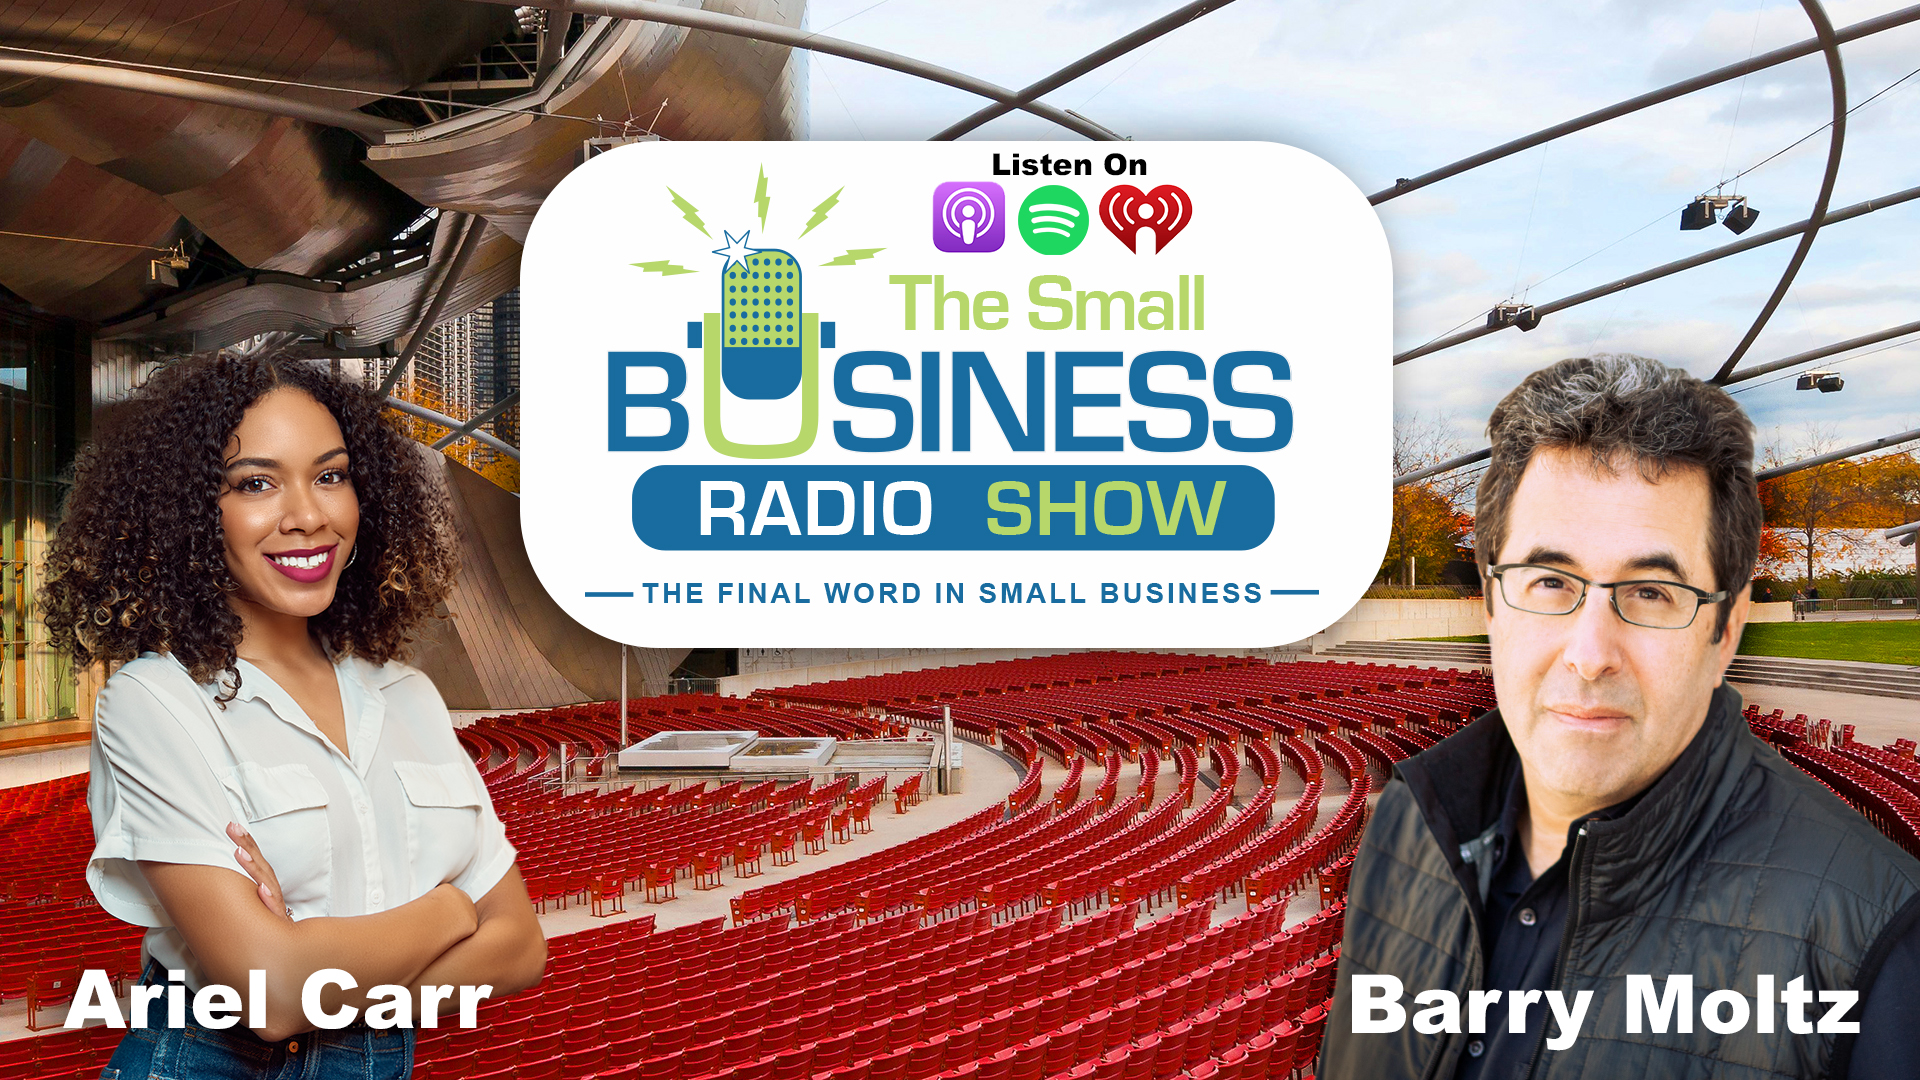 Ariel Carr on The Small Business Radio Show